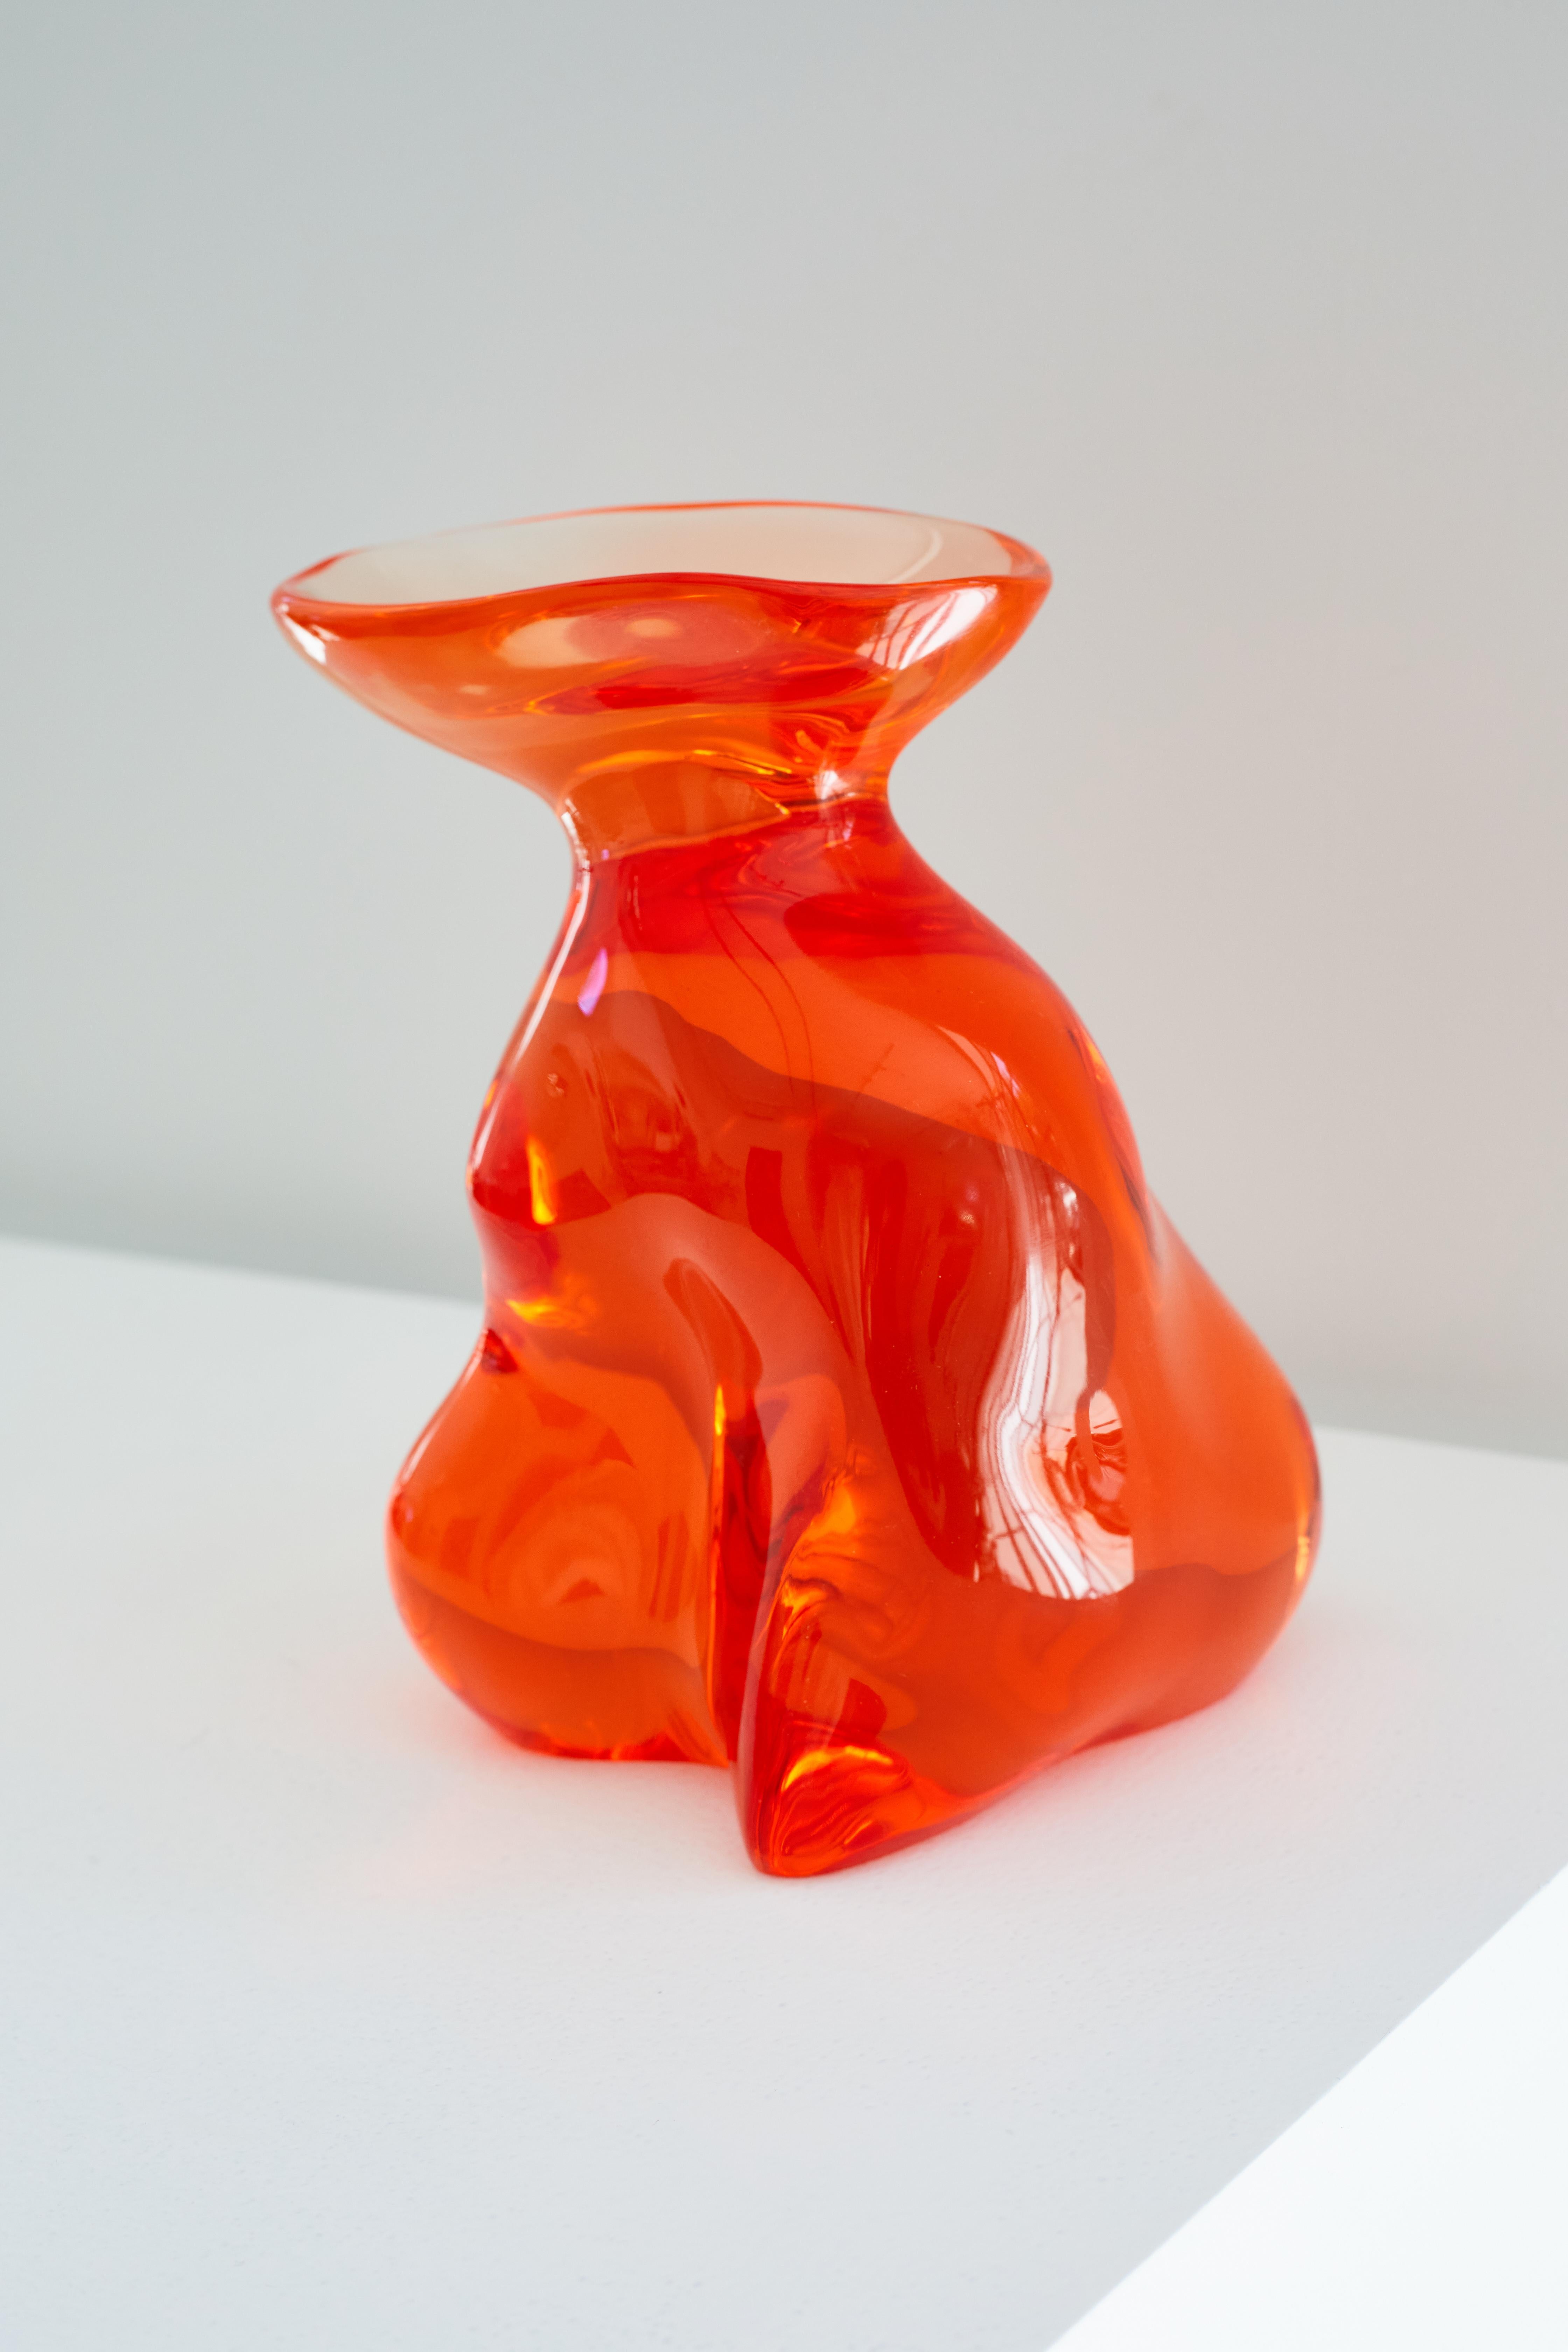 Paula Hayes
Little Quince Birdbath, 2018
Cast resin with high-gloss polished acrylic finish Dimensions: 9” H x 7.6” W x 7.6” D
Photo: Ethan Herrington

A major theme in Hayes’ work is the connection of people to the natural environment, and